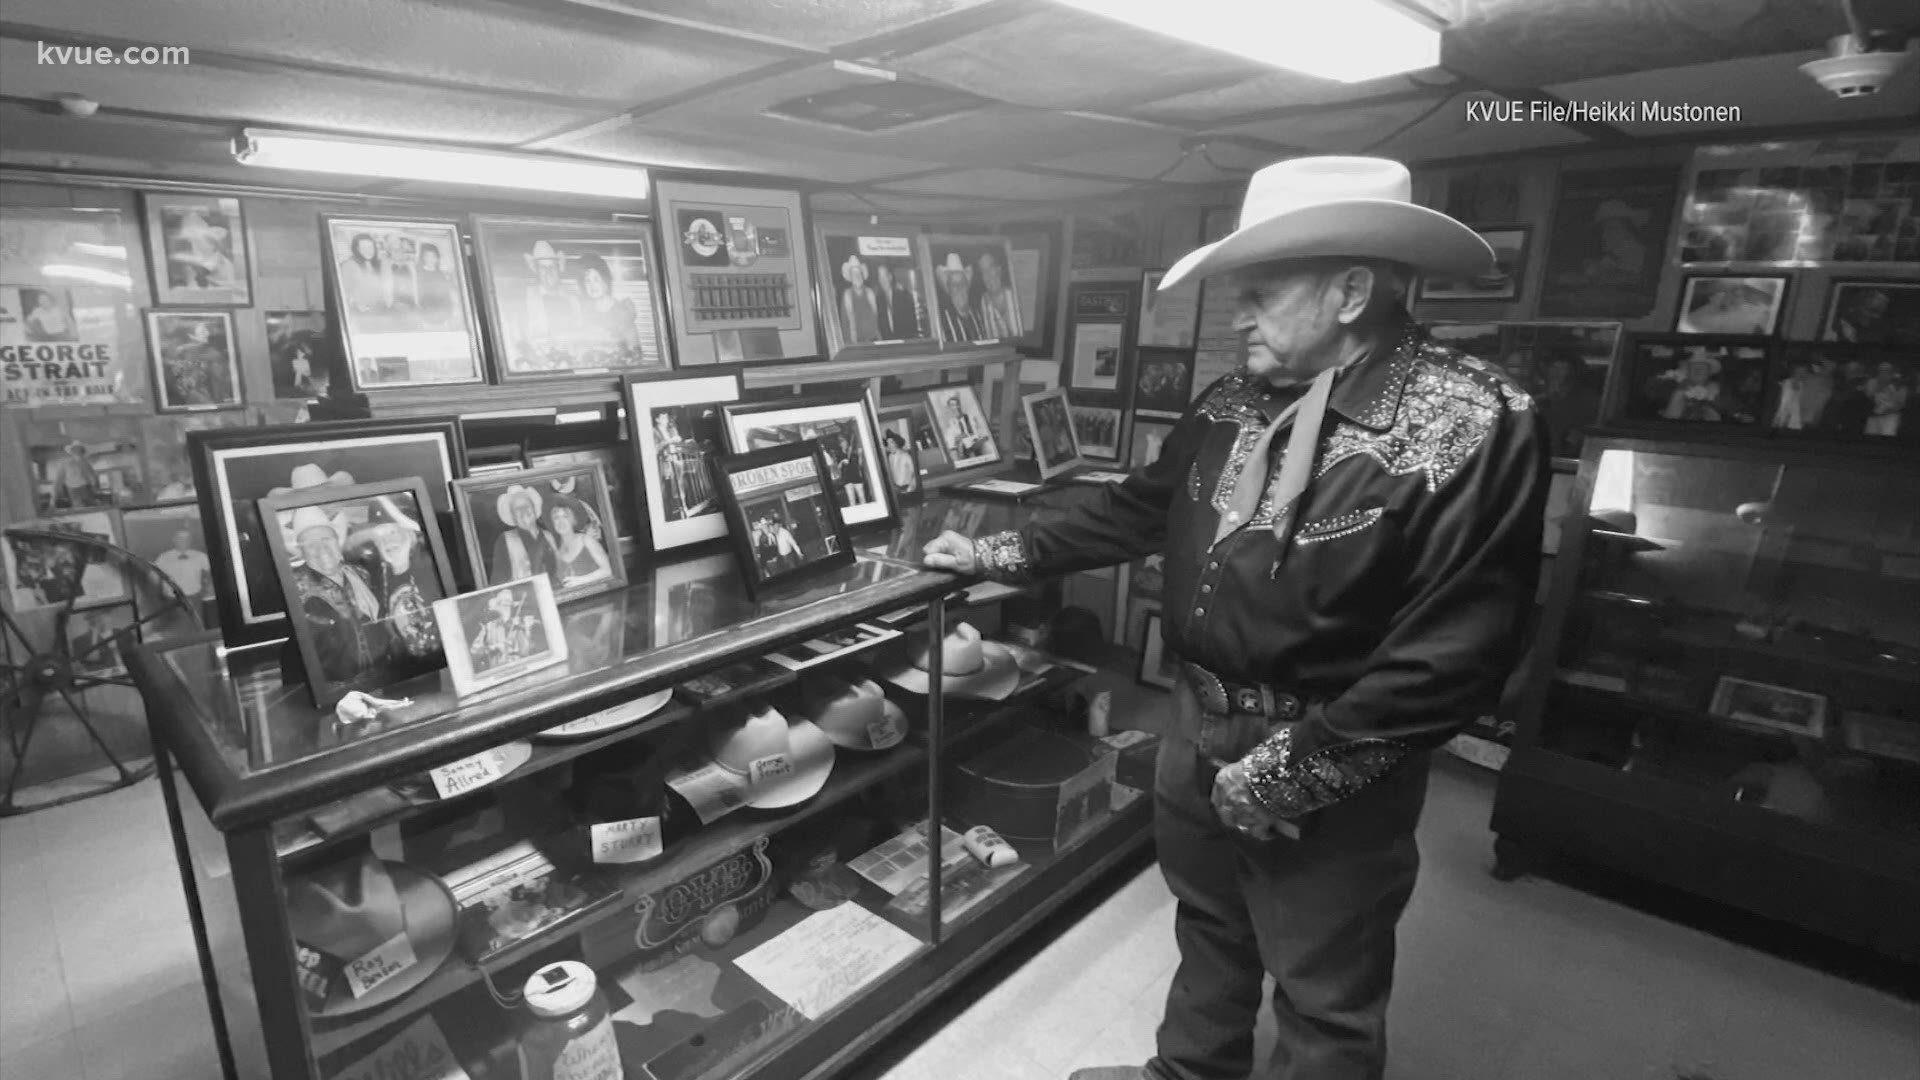 Known for his love of country music and rhinestone shirts, he founded the Broken Spoke in 1964. The dance hall has played host to country superstars since it opened.